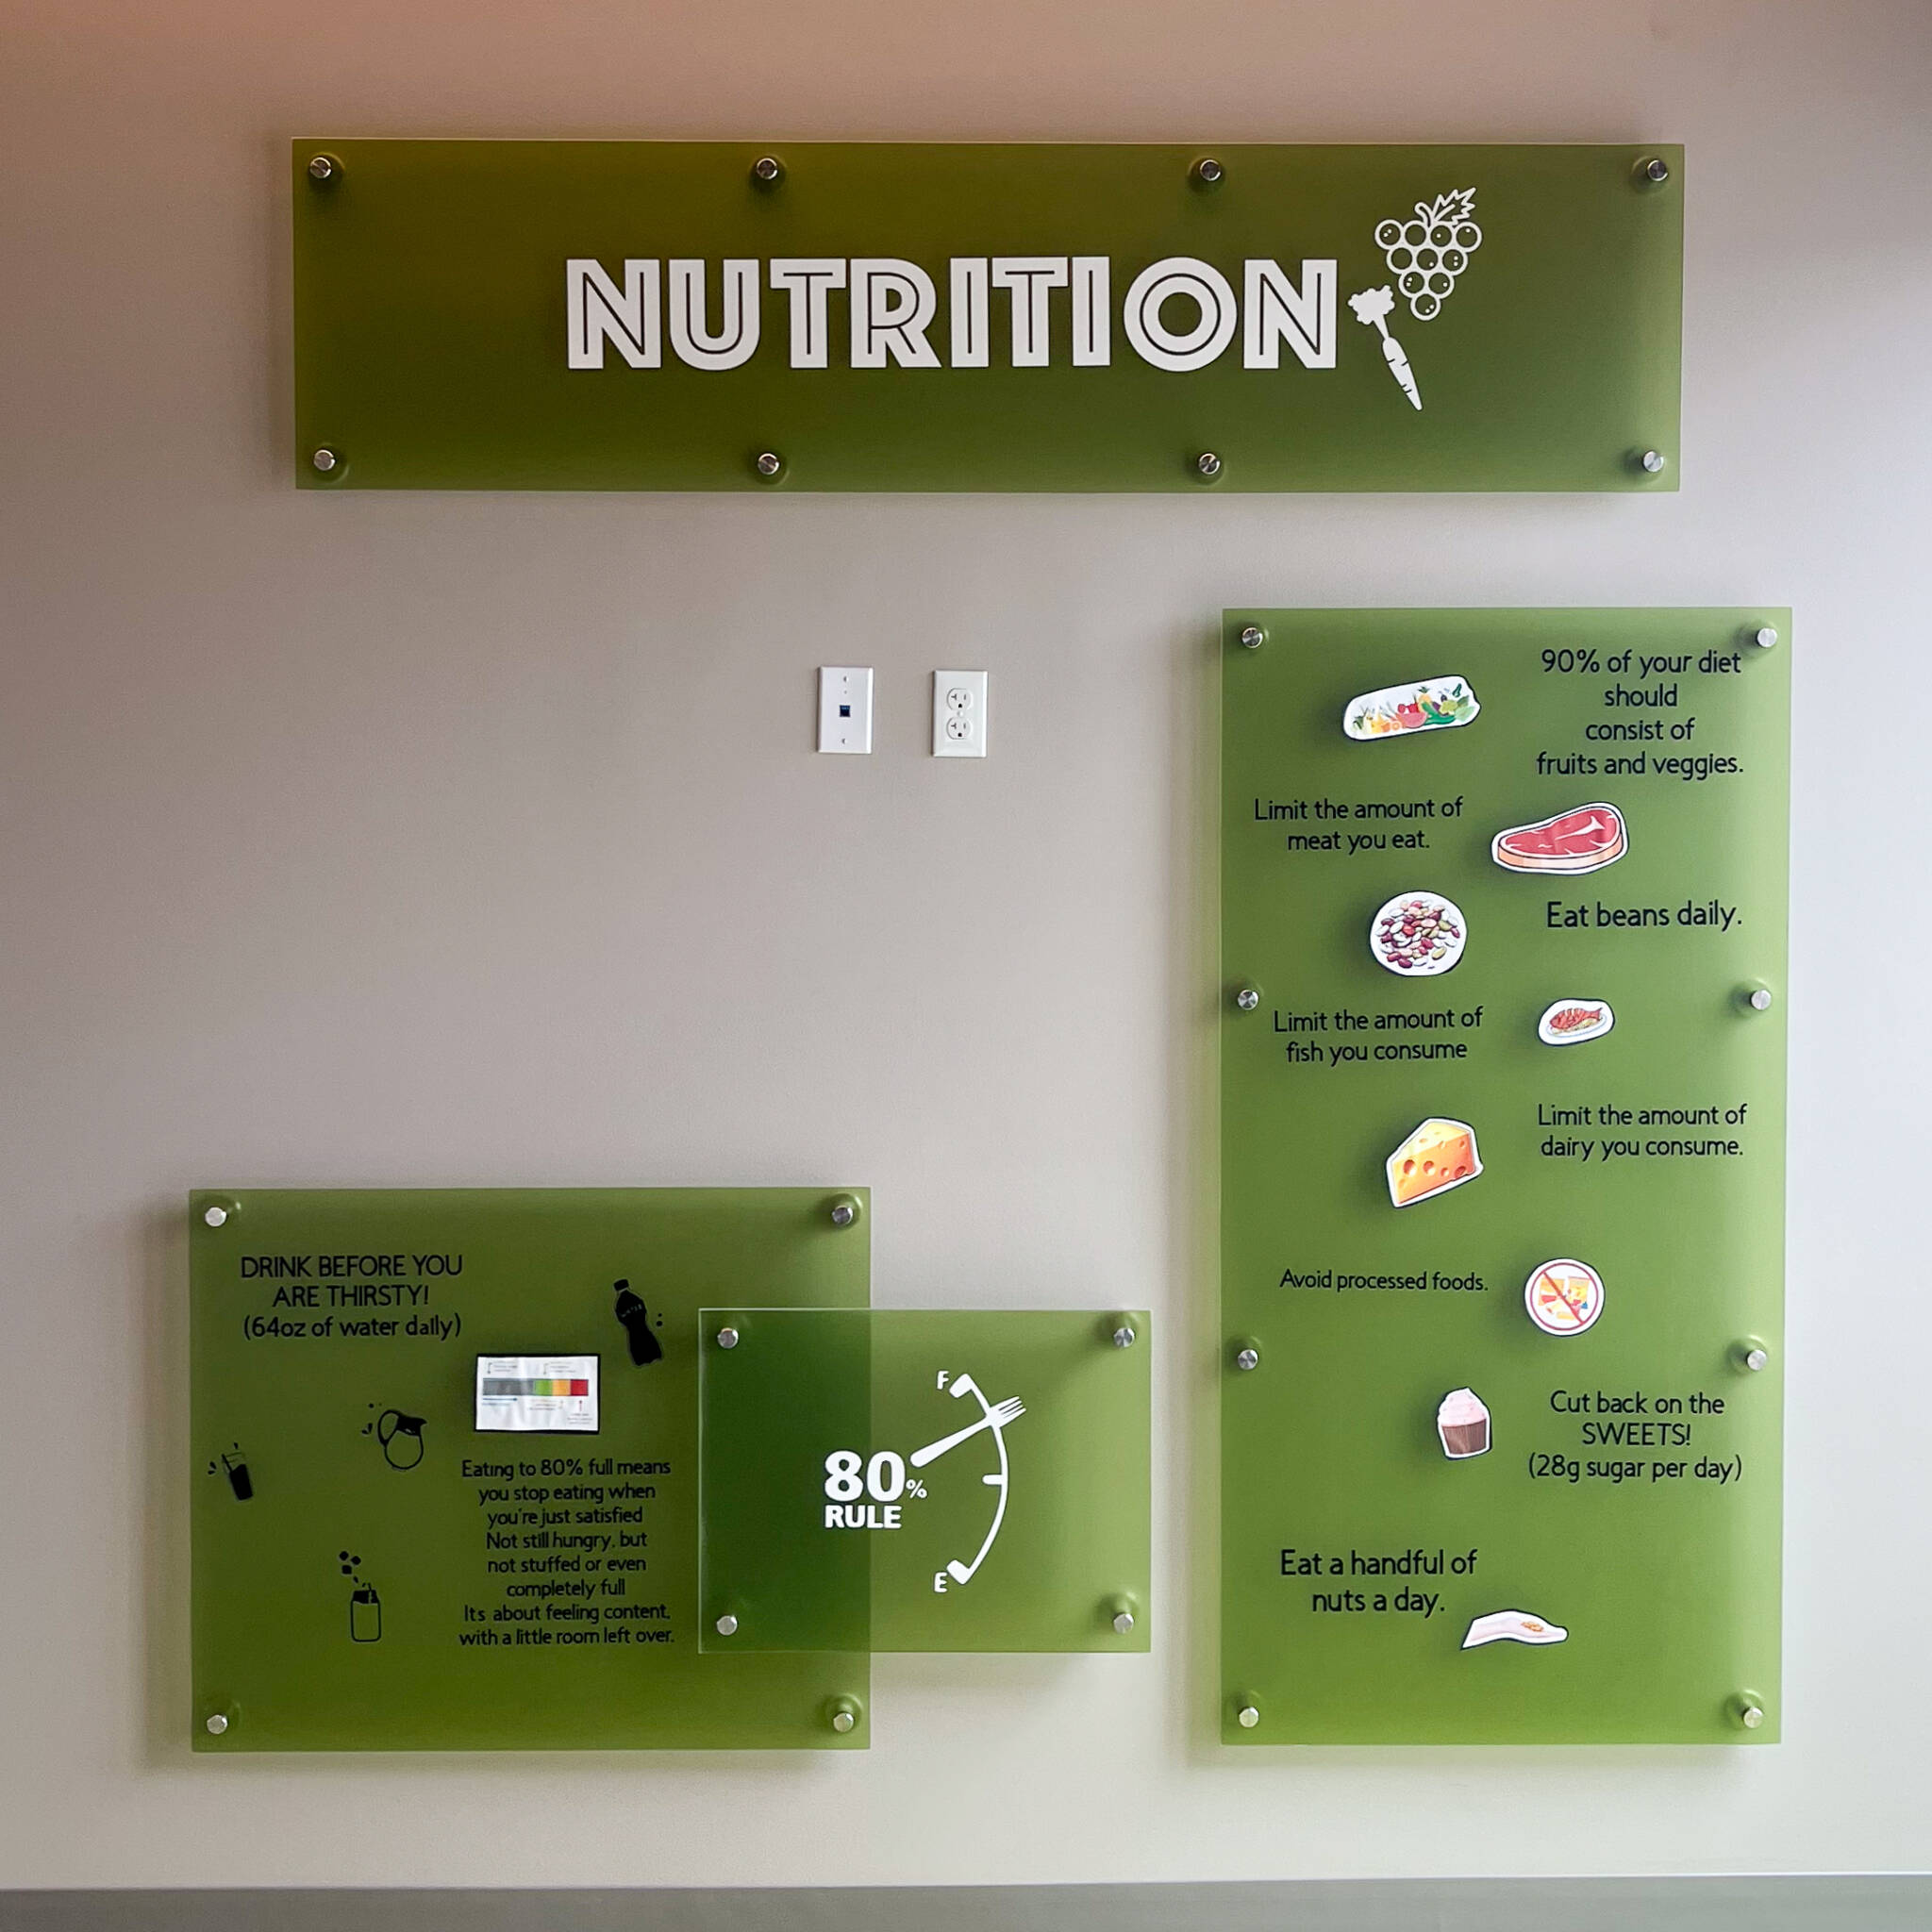 Signage explaining the importance of nutrition at the wellness center